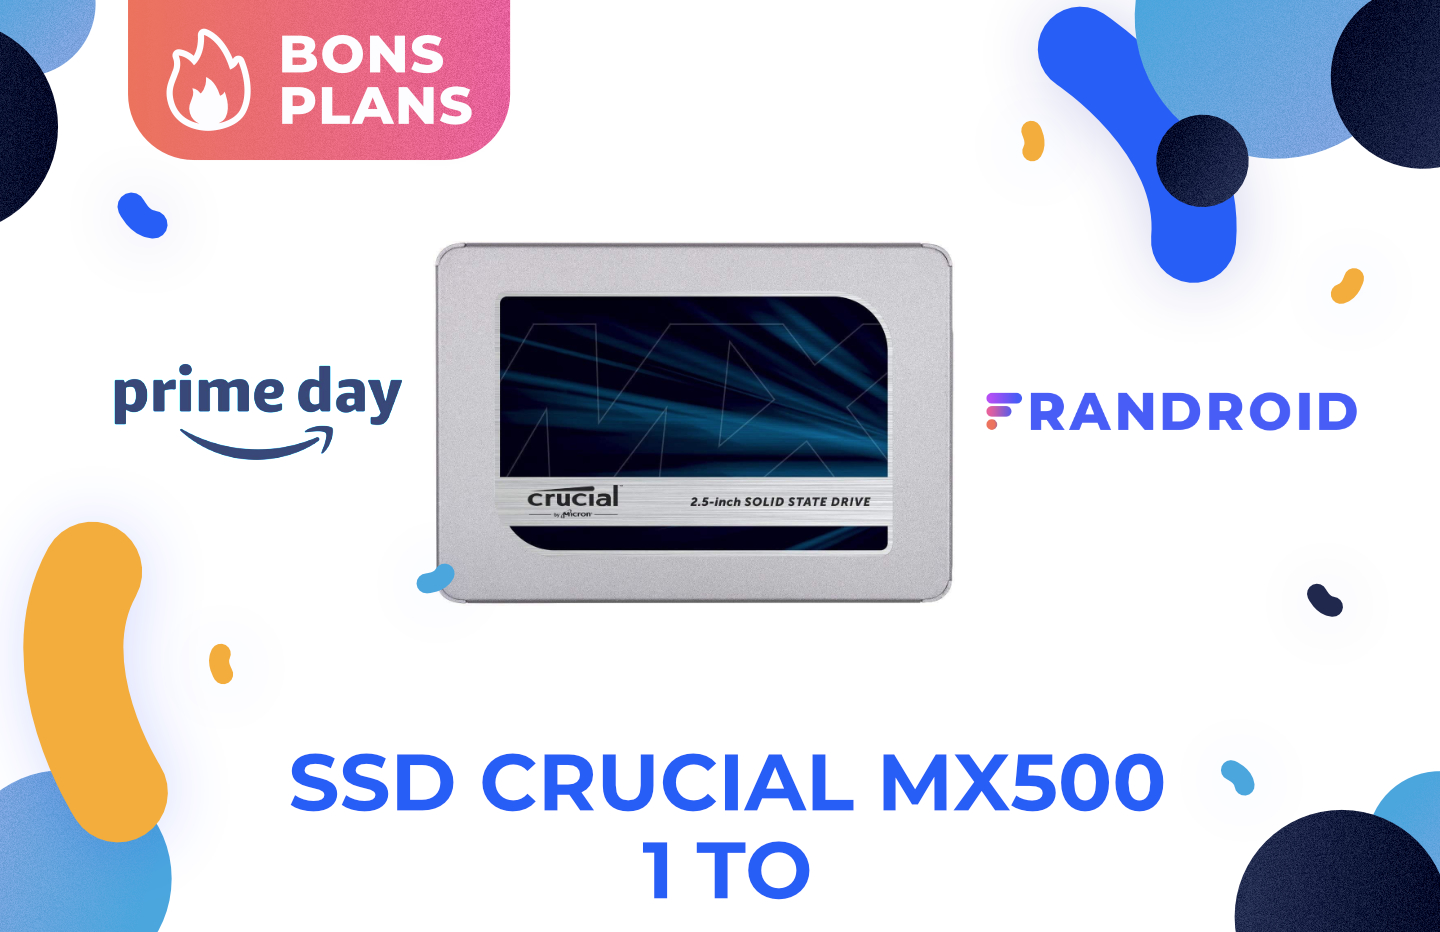 https://images.frandroid.com/wp-content/uploads/2021/06/ssd-crucial-mx500-1-to-prime-day-frandroid-1.jpg